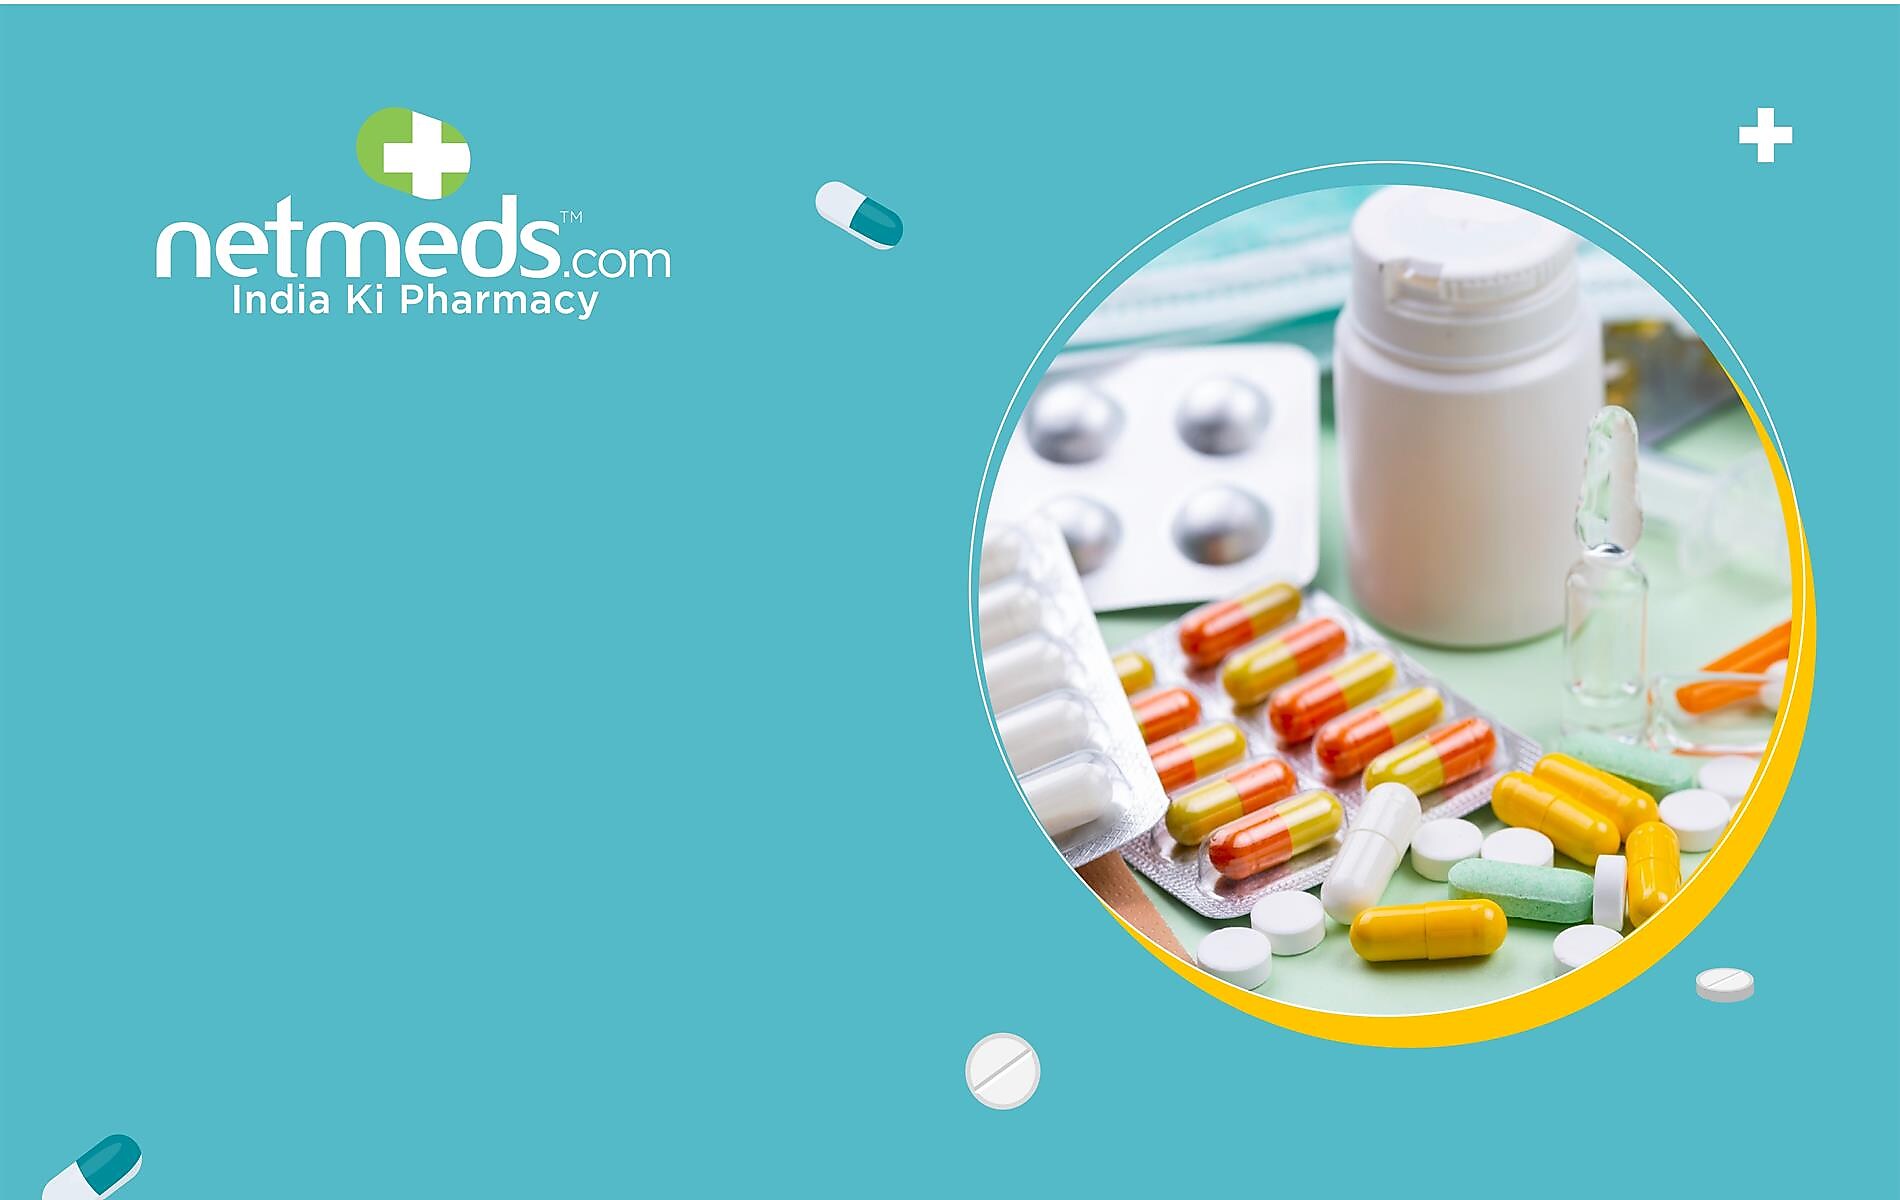 Free 6 months Netmeds membership with 500 points